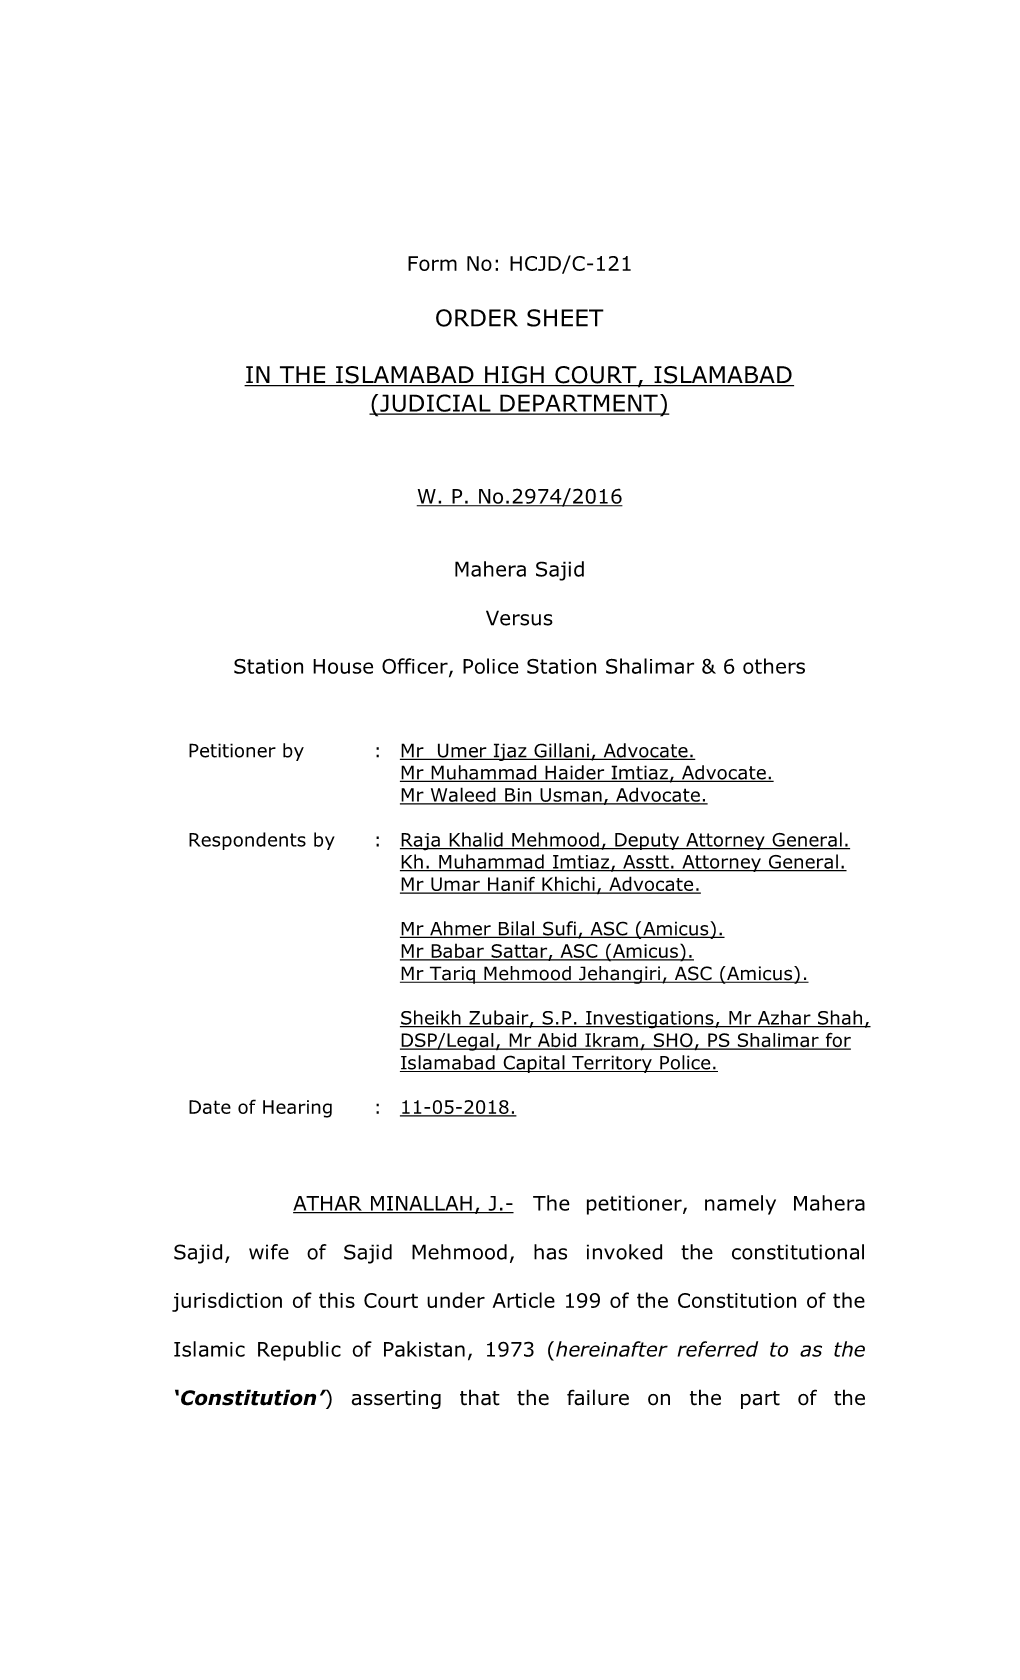 Order Sheet in the Islamabad High Court, Islamabad (Judicial Department)